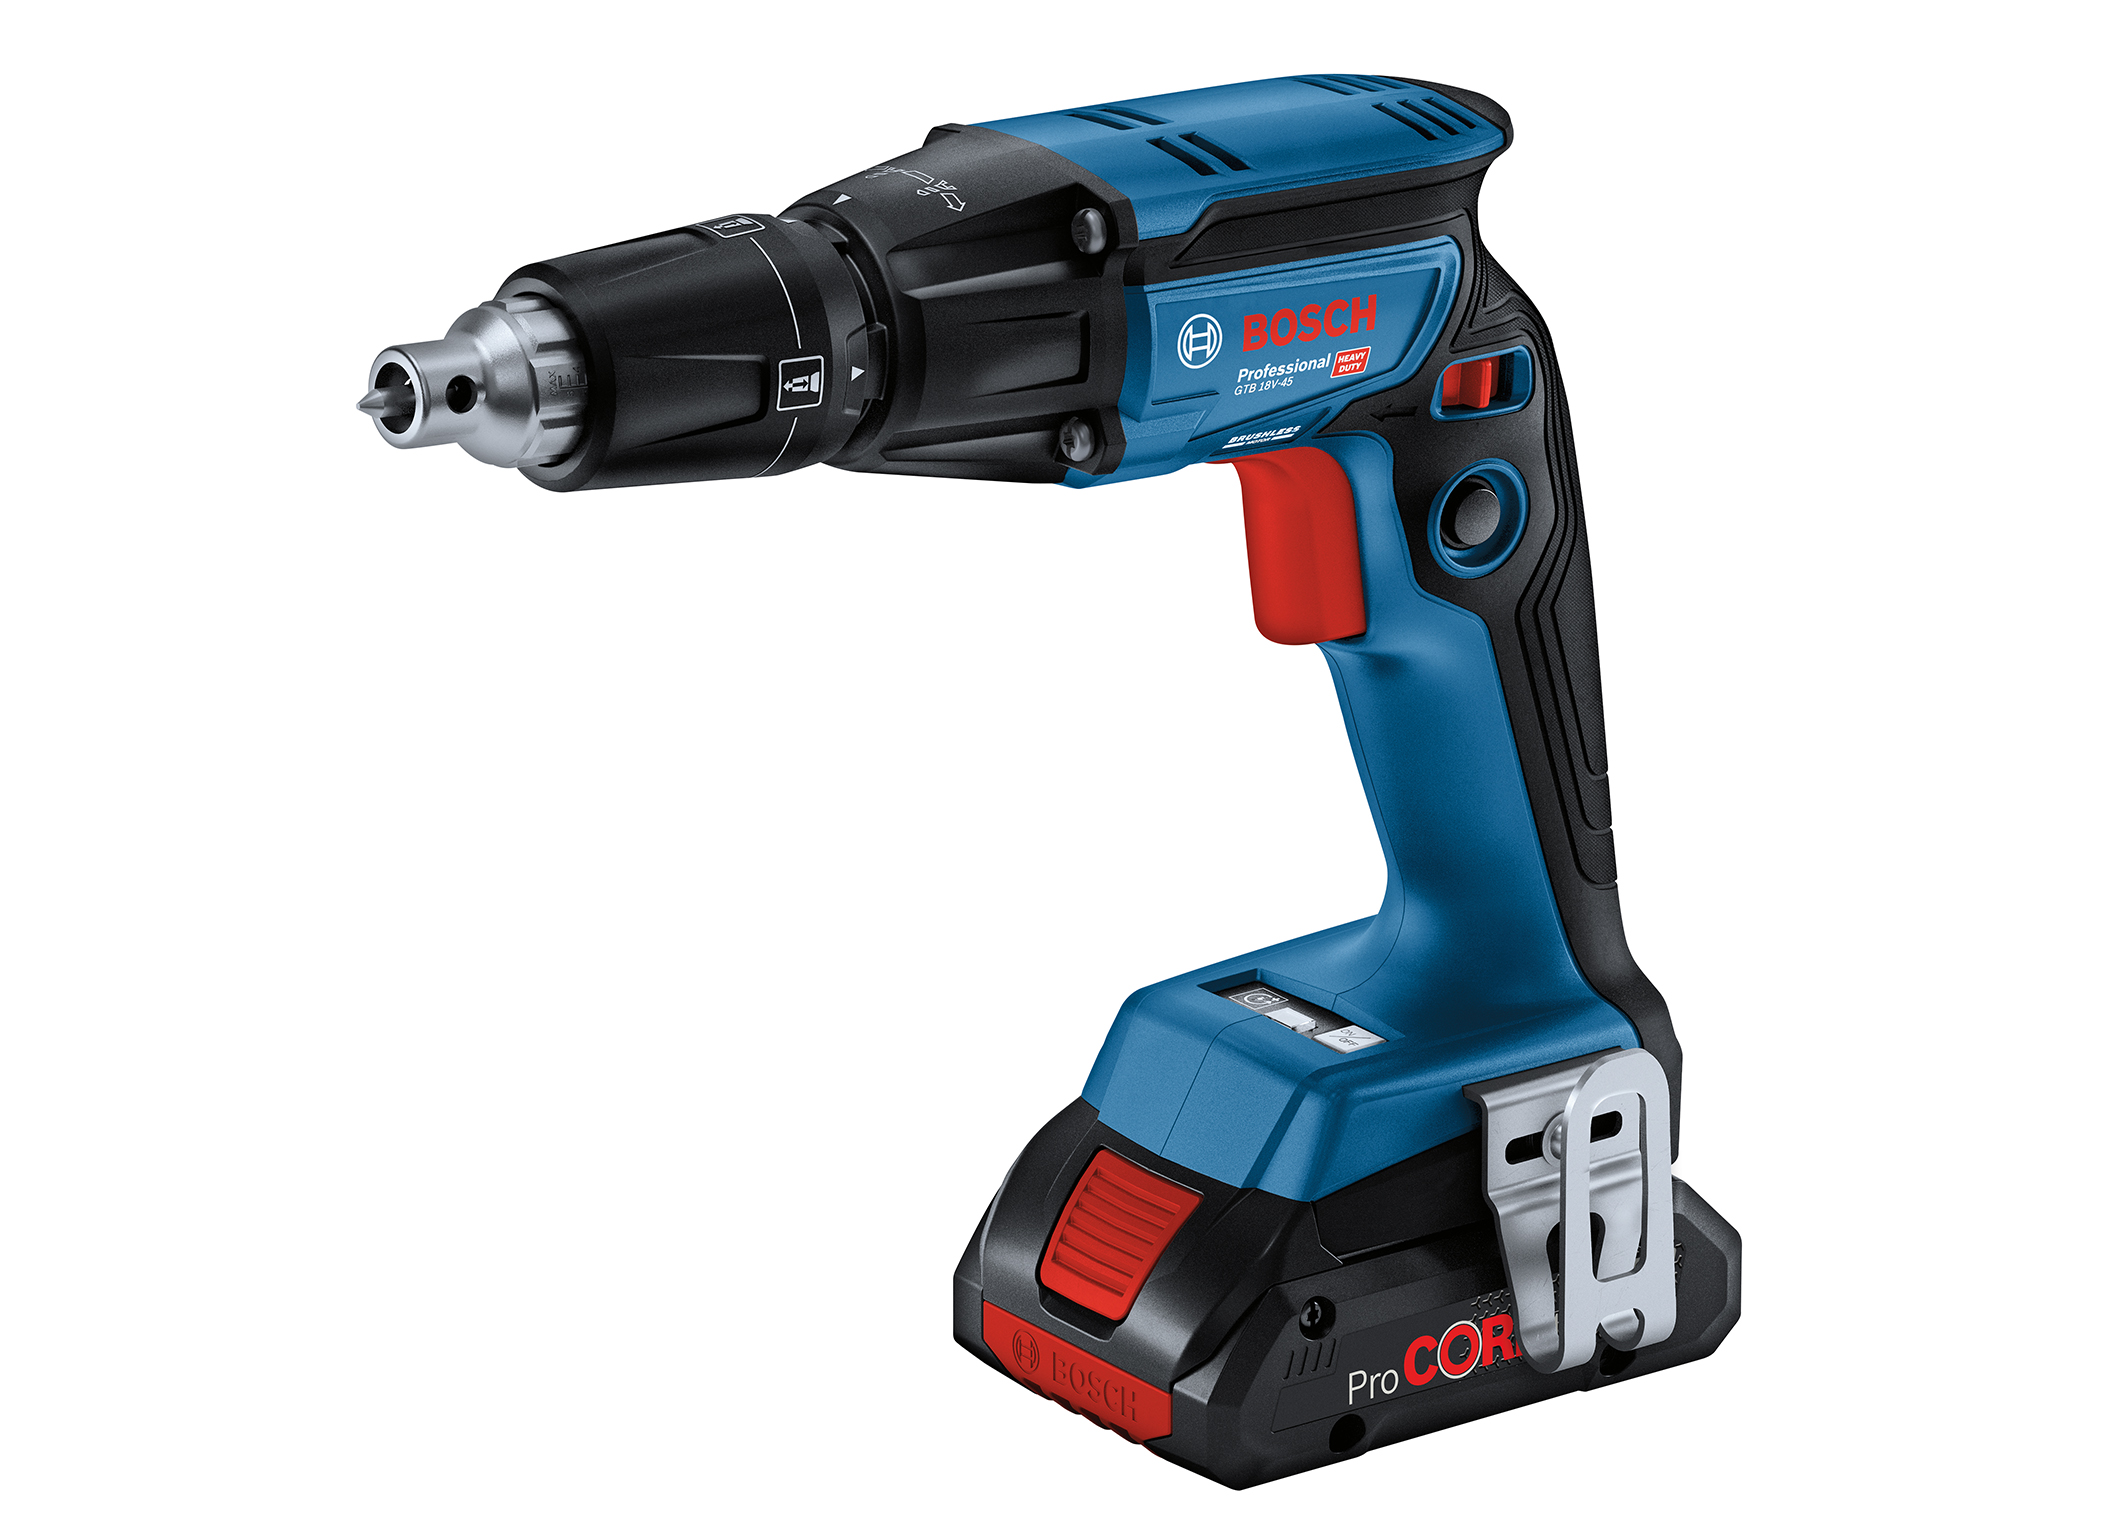 New in the ‘Professional 18V System‘: GTB 18V-45 Professional cordless drywall screwdriver from Bosch for professionals